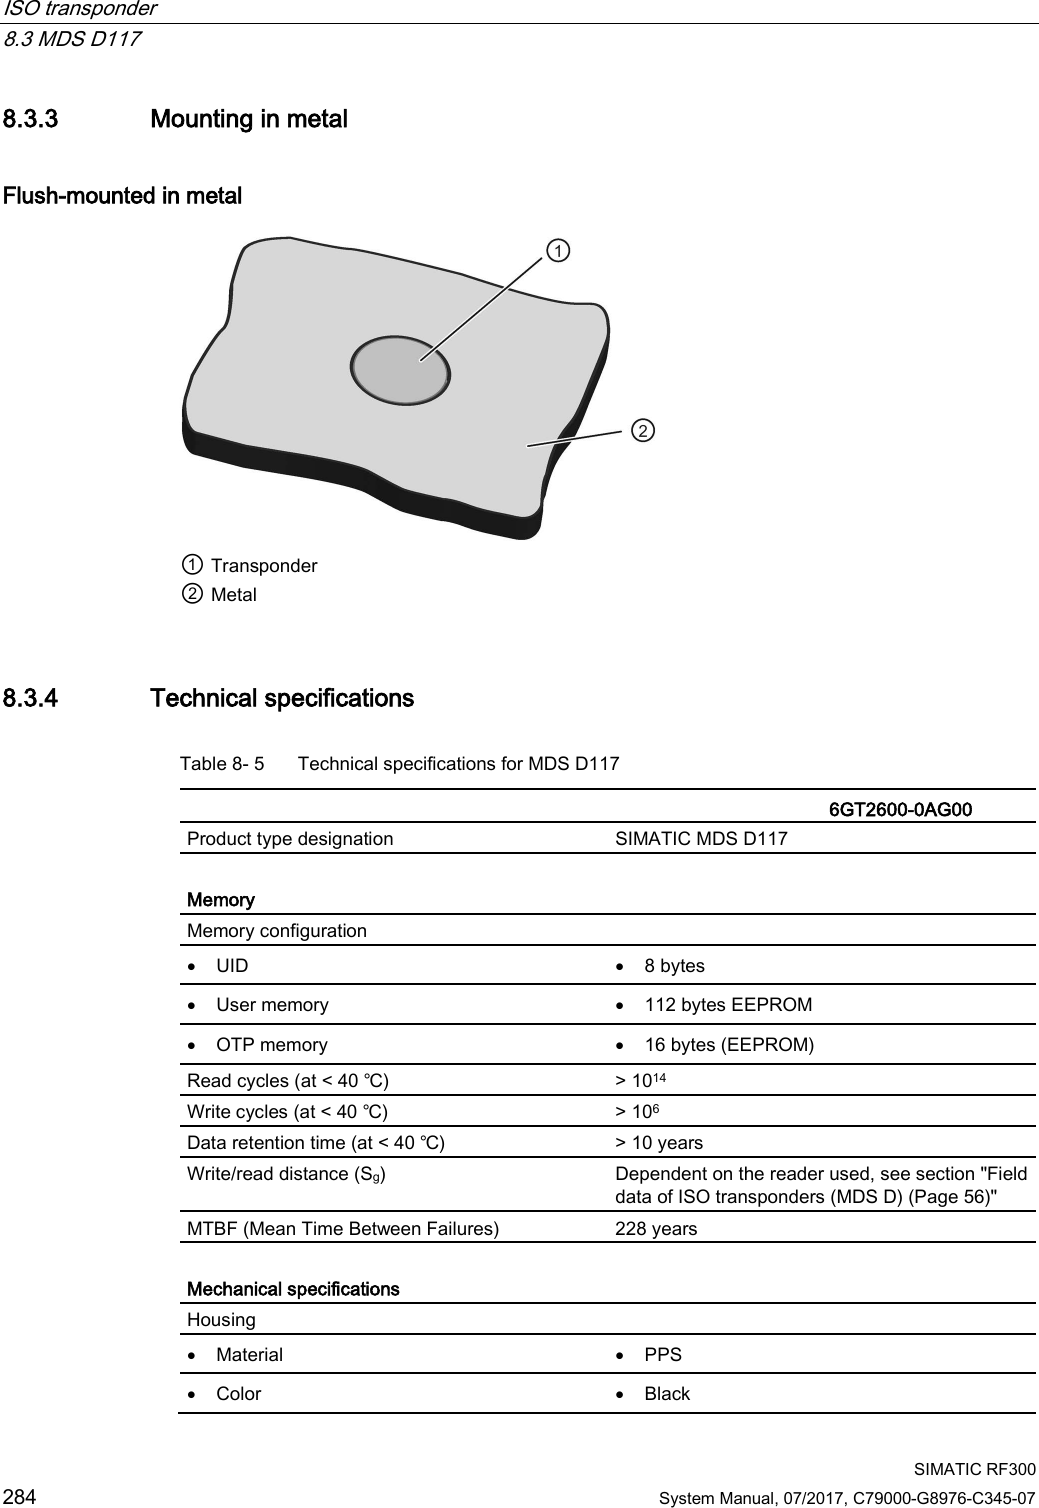 ISO transponder   8.3 MDS D117  SIMATIC RF300 284 System Manual, 07/2017, C79000-G8976-C345-07 8.3.3 Mounting in metal Flush-mounted in metal  ① Transponder ② Metal 8.3.4 Technical specifications Table 8- 5  Technical specifications for MDS D117    6GT2600-0AG00 Product type designation SIMATIC MDS D117  Memory Memory configuration  • UID • 8 bytes • User memory • 112 bytes EEPROM • OTP memory • 16 bytes (EEPROM) Read cycles (at &lt; 40 ℃) &gt; 1014 Write cycles (at &lt; 40 ℃) &gt; 106 Data retention time (at &lt; 40 ℃) &gt; 10 years Write/read distance (Sg)  Dependent on the reader used, see section &quot;Field data of ISO transponders (MDS D) (Page 56)&quot; MTBF (Mean Time Between Failures) 228 years  Mechanical specifications Housing  • Material • PPS • Color • Black 